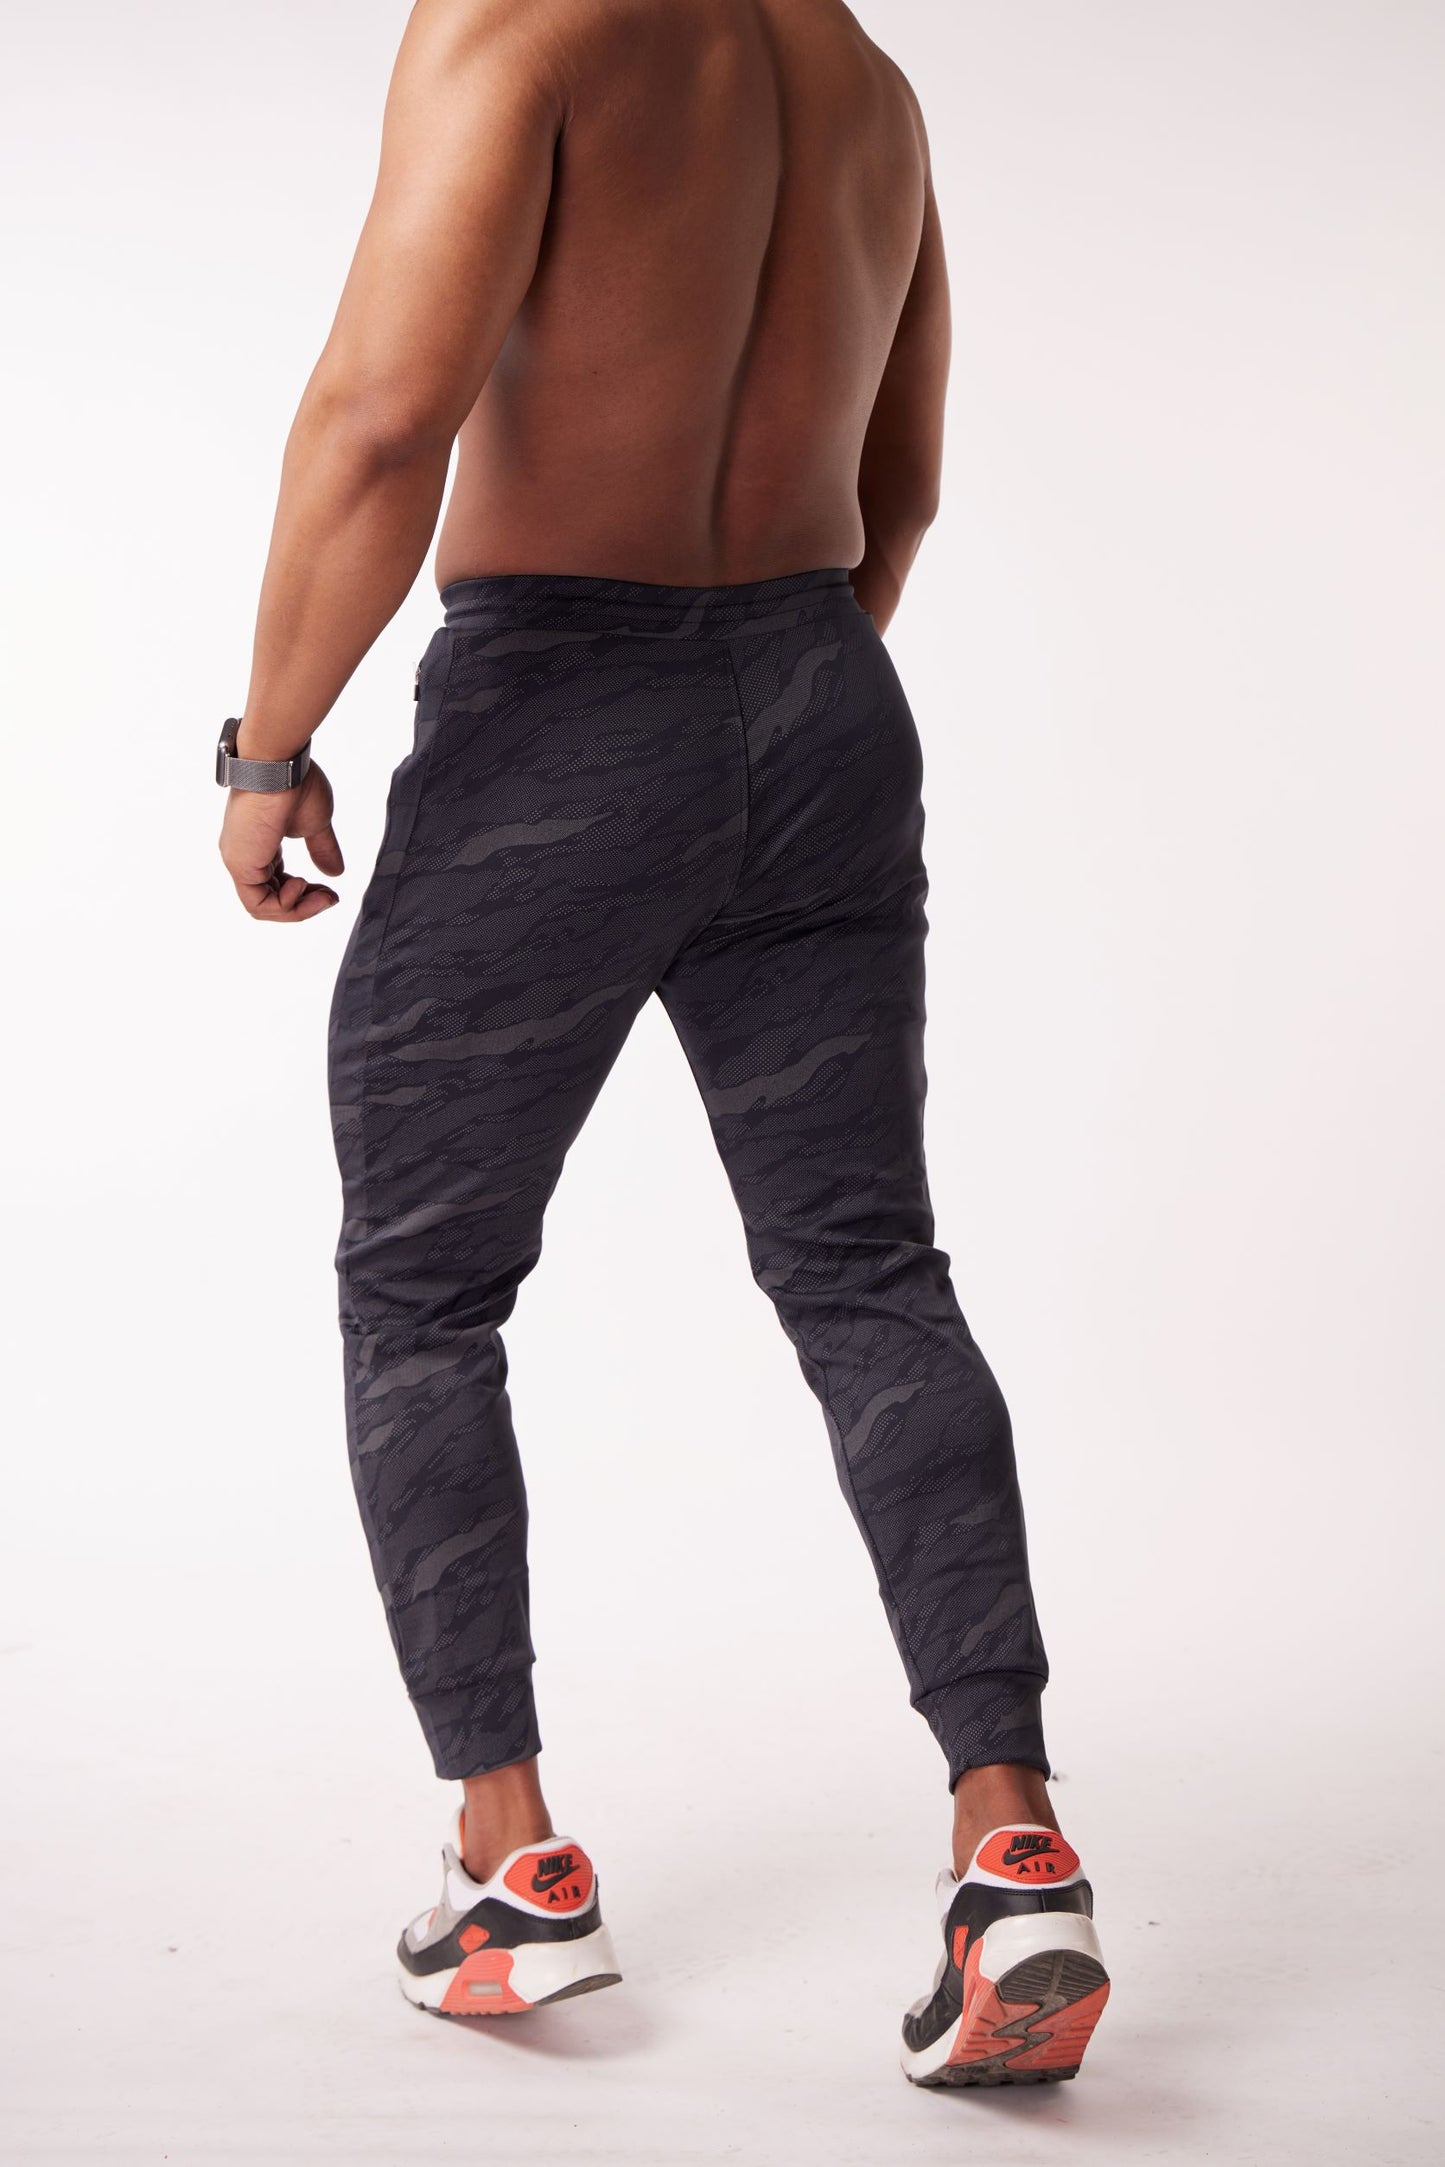 CAMO JOGGERS ANKLE FIT (GREY) - The Legacy Bruh